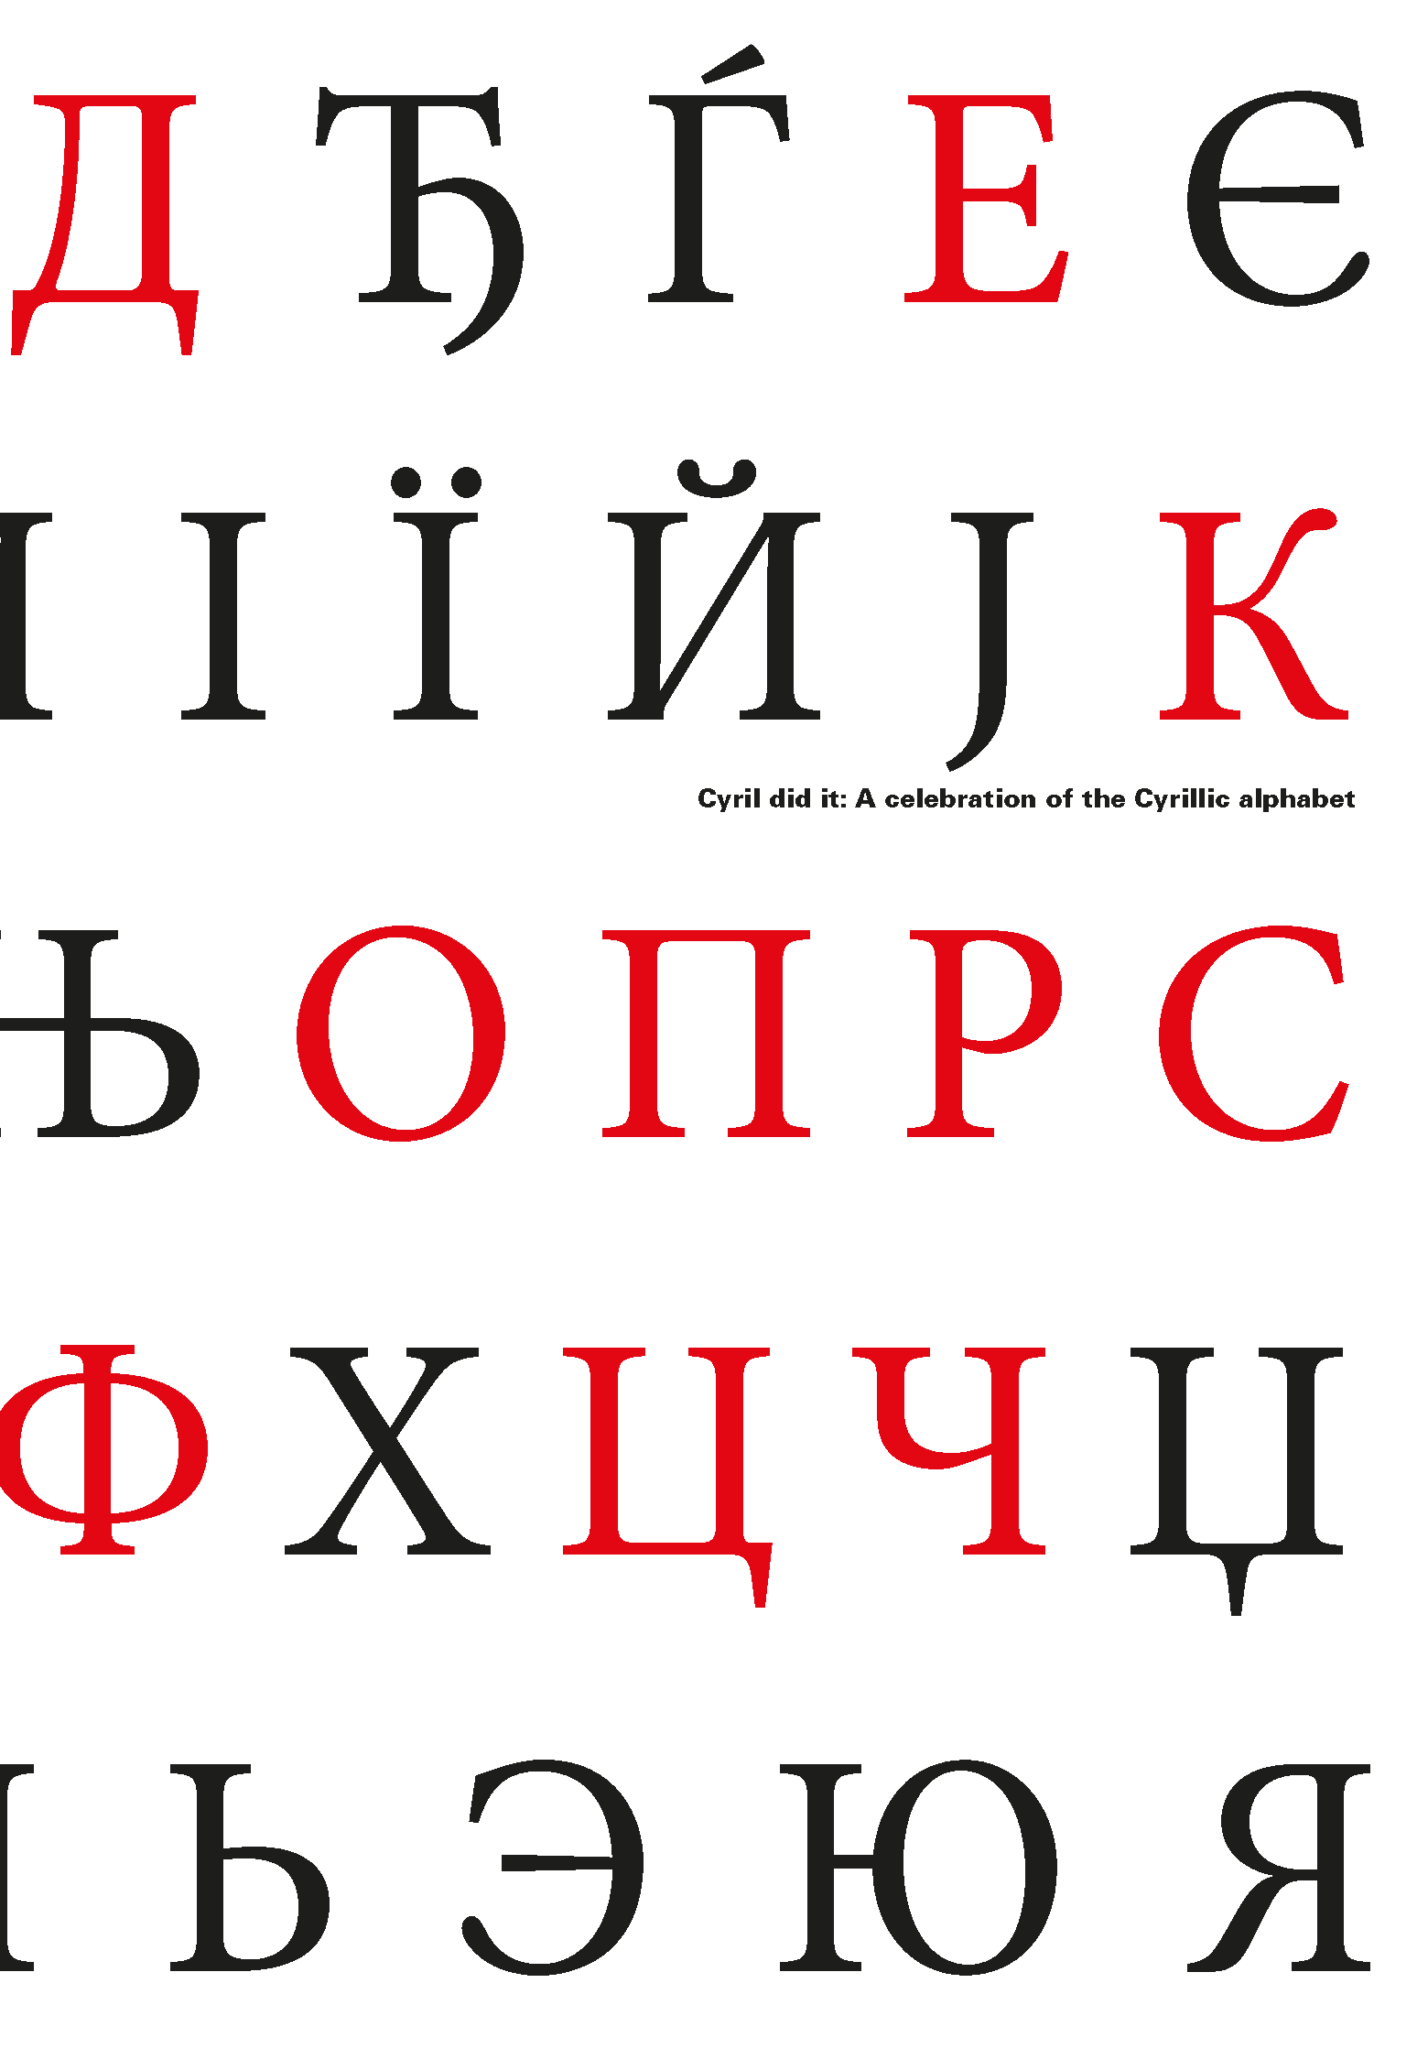 Cyril did it: A celebration of the Cyrillic alphabet - Local Fonts